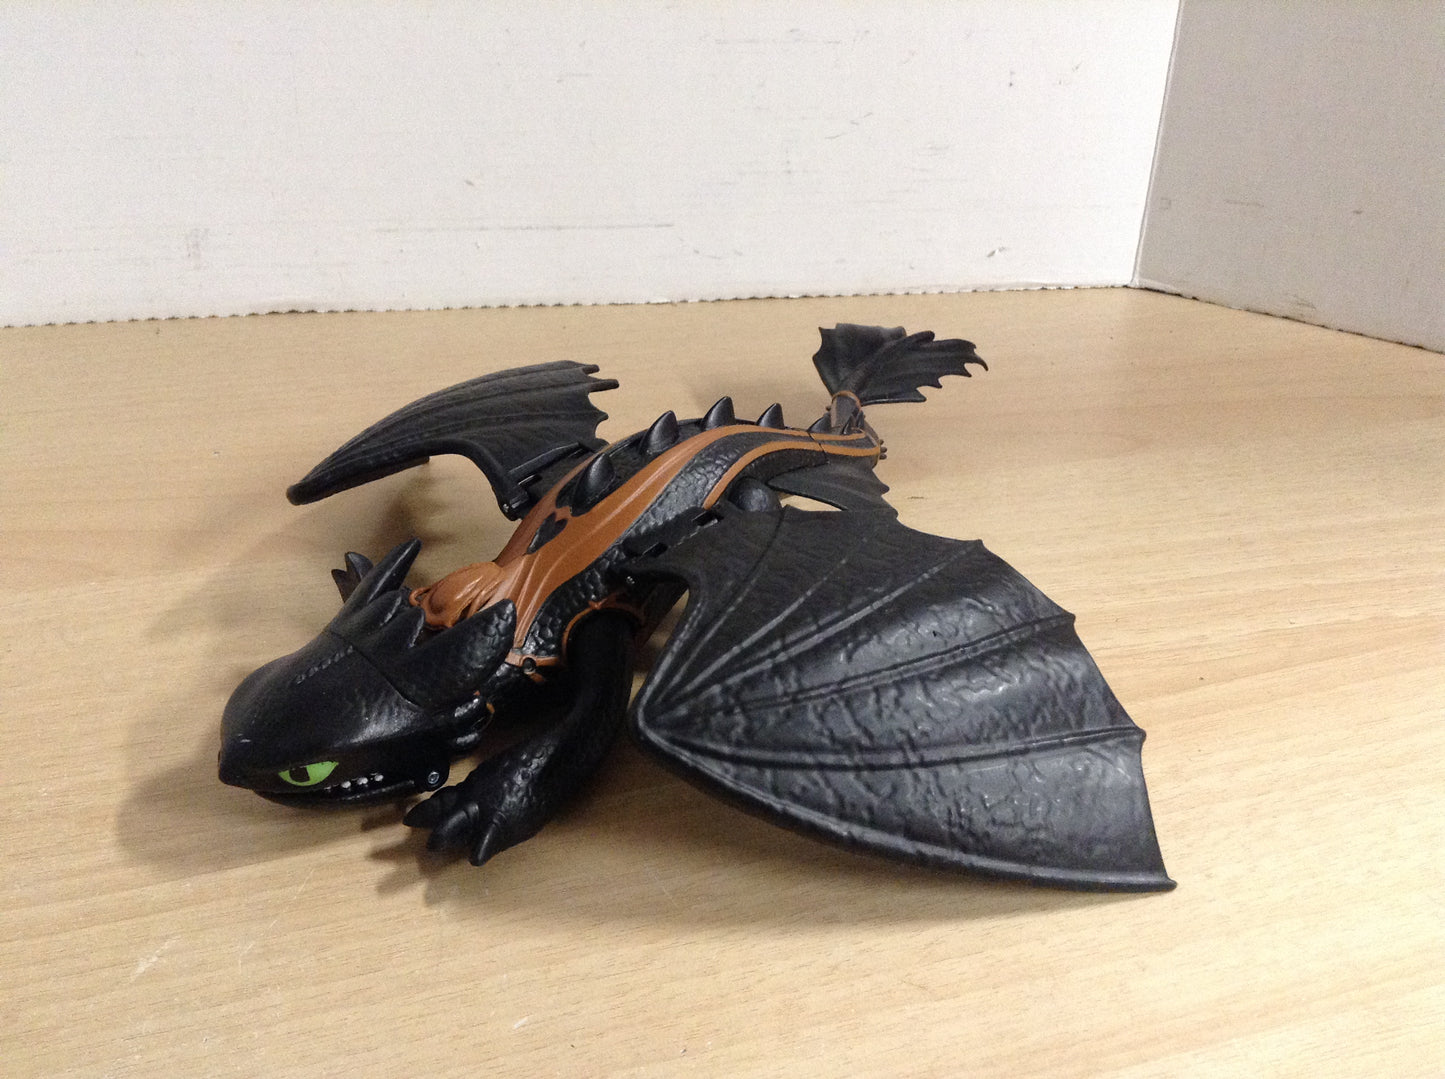 3 How To Train Your Dragon Toys